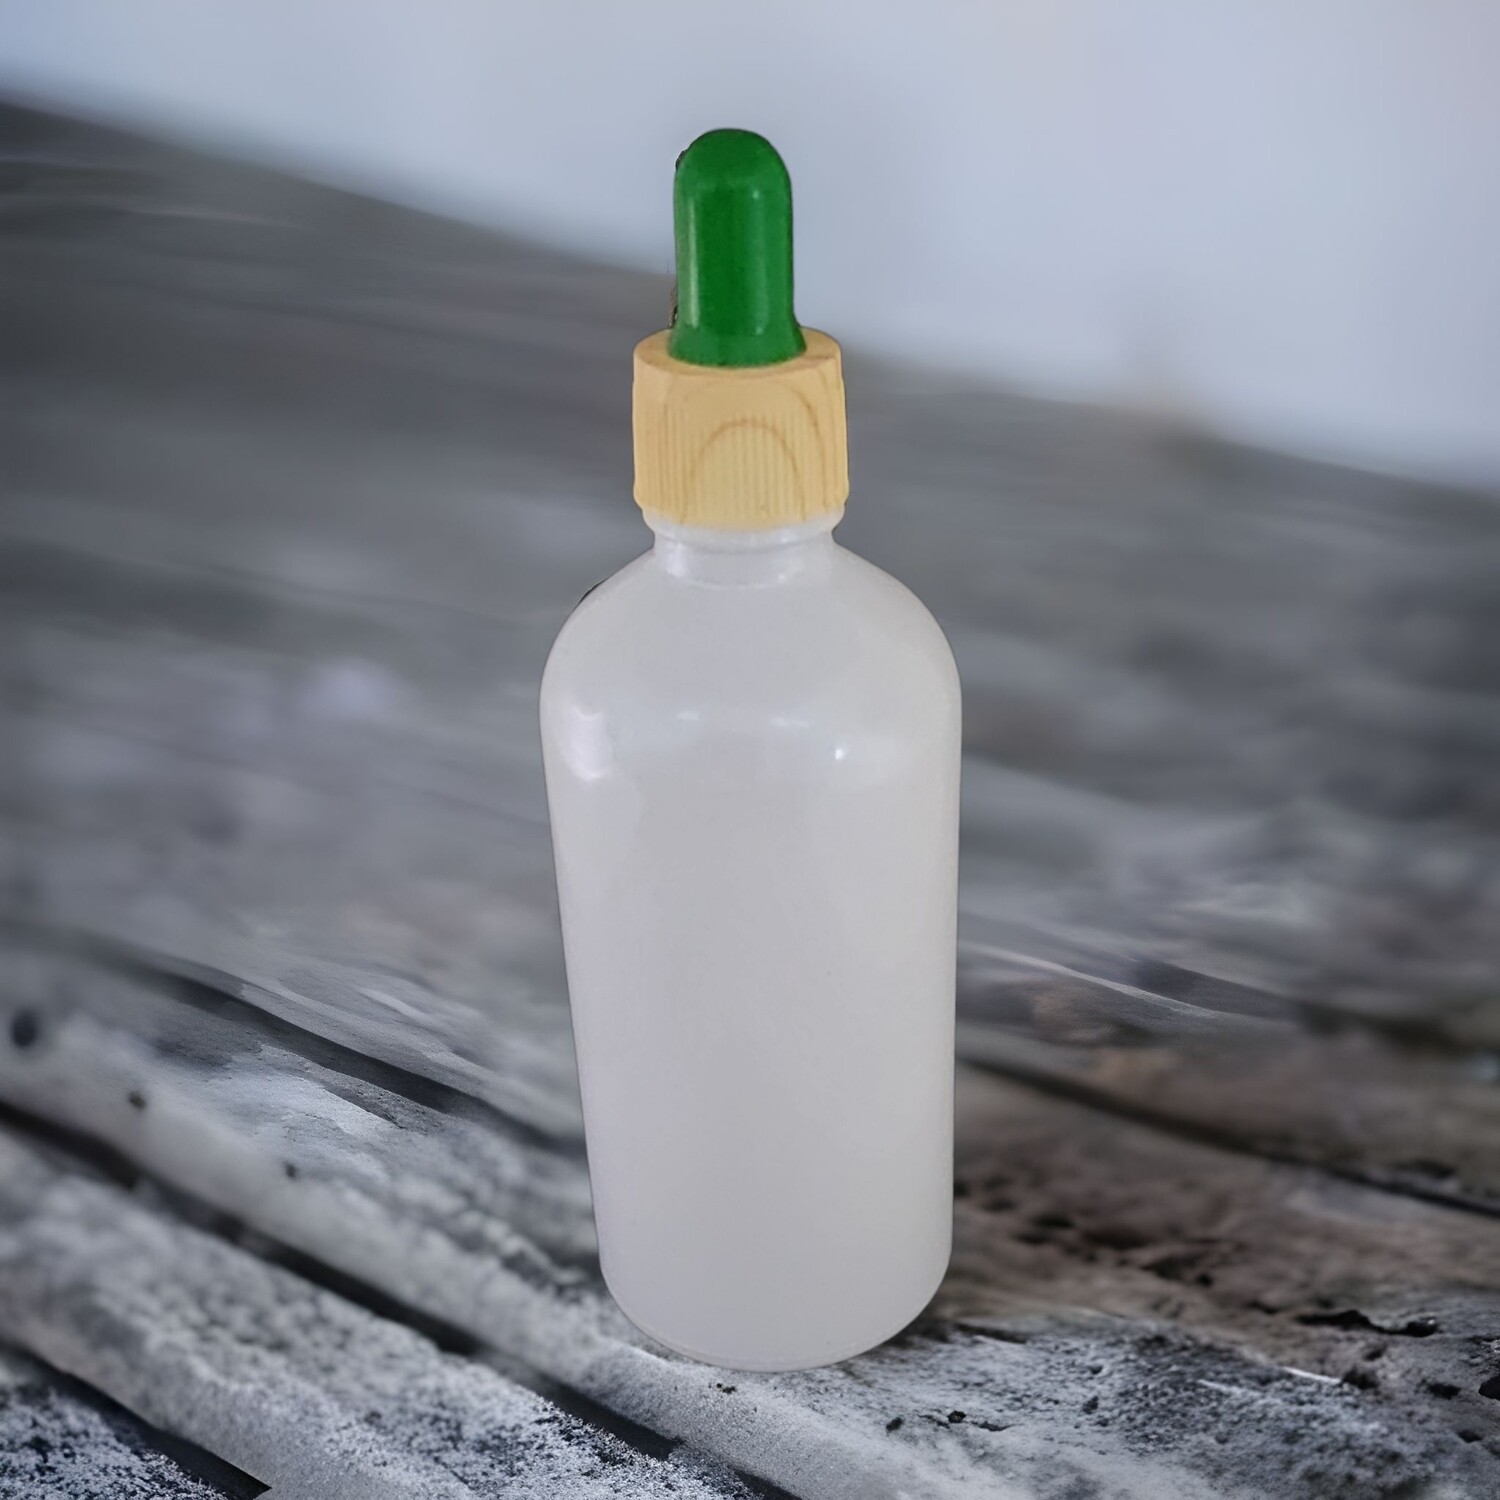 100mL WHITE PEARL (Coated) glass dropper bottle with GREEN TEAT & IMITATION TIMBER CAP - SINGLE BUY